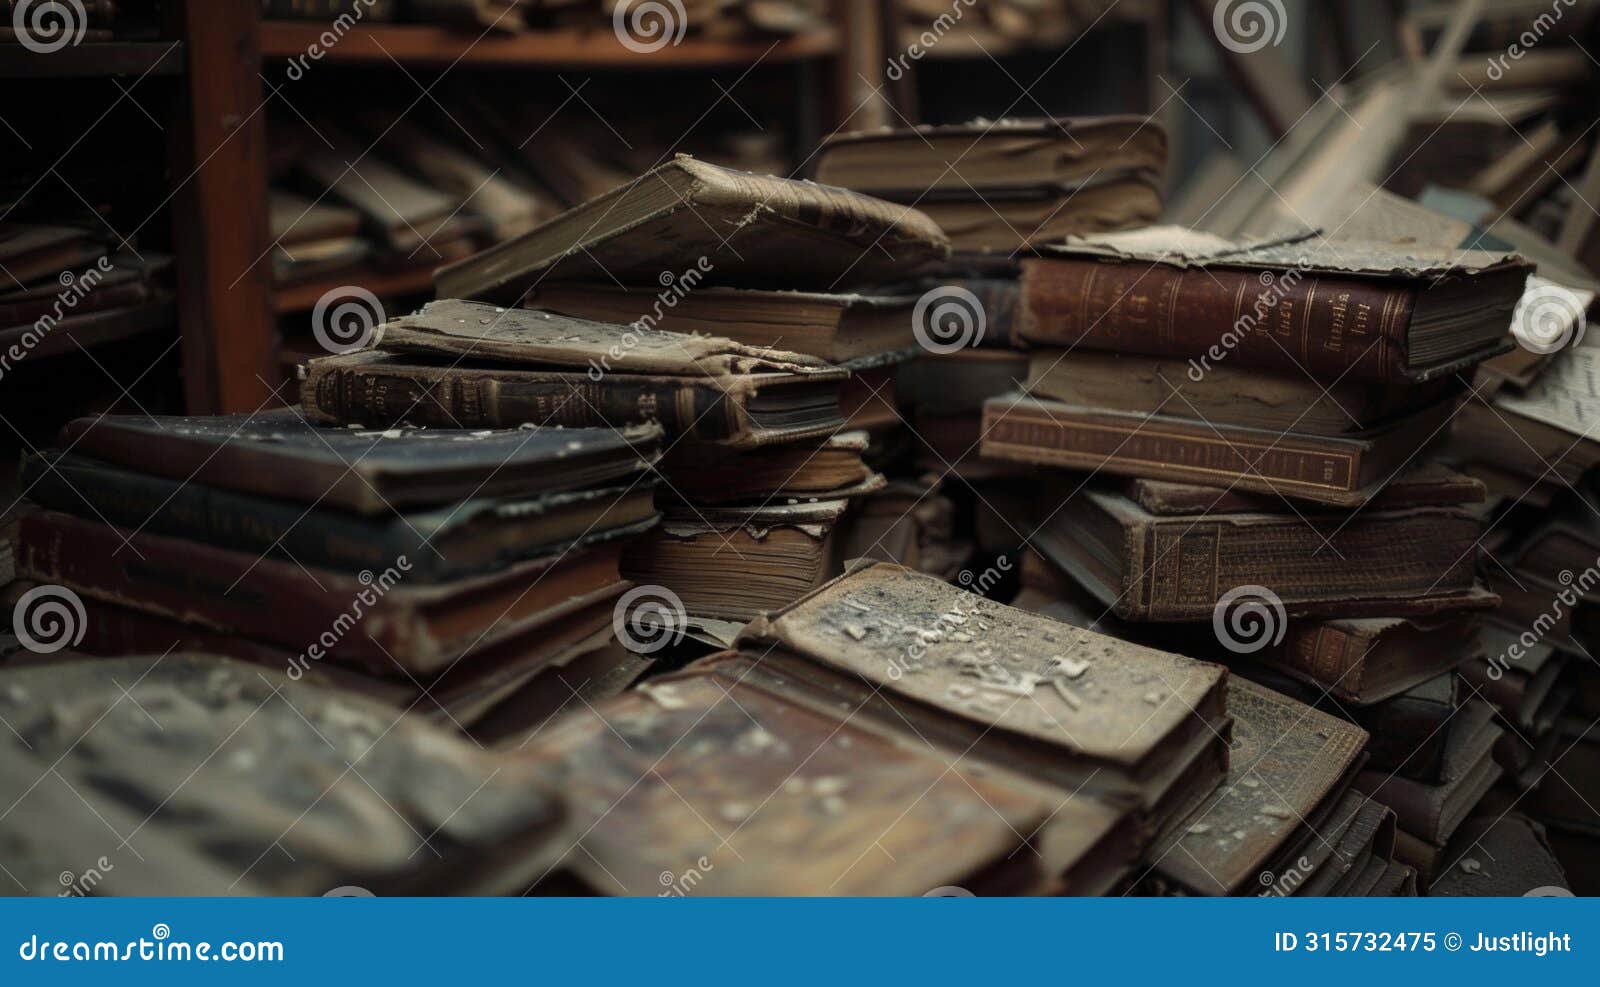 amidst the chaos of a cluttered attic the outlines of faded leatherbound books dating back centuries emerge in the